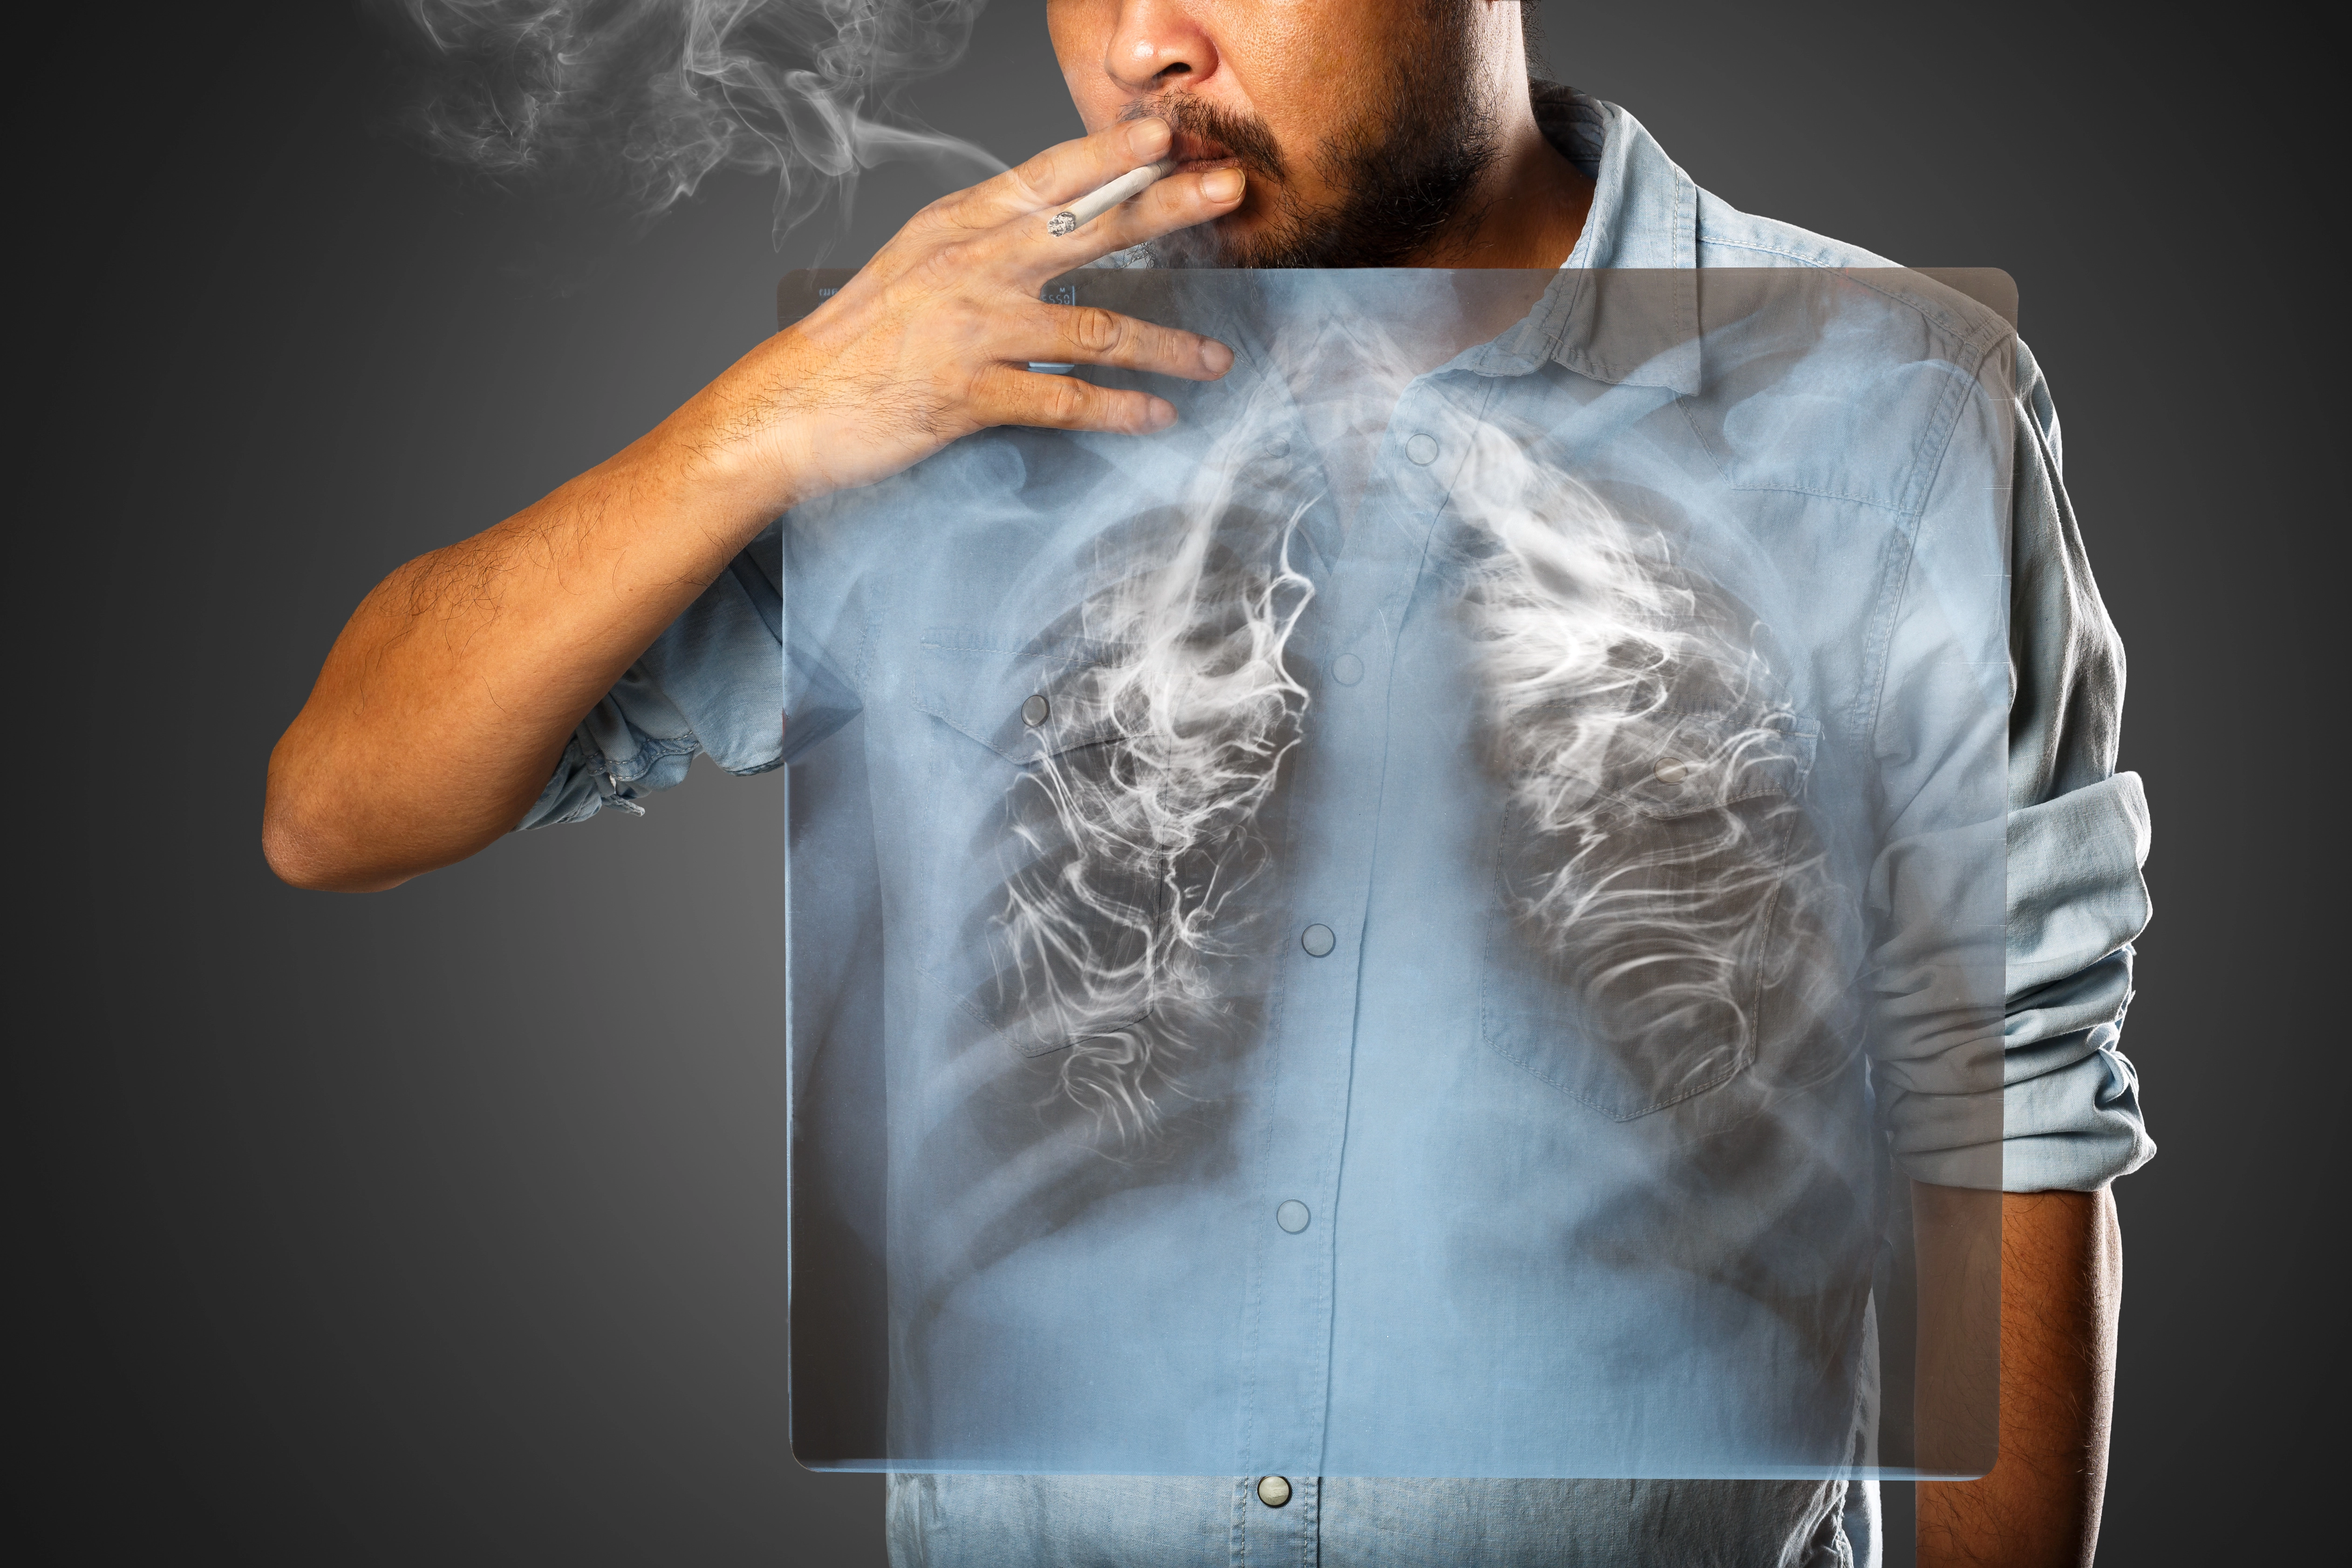 The harmful effects of smoking on the body and cancer risk